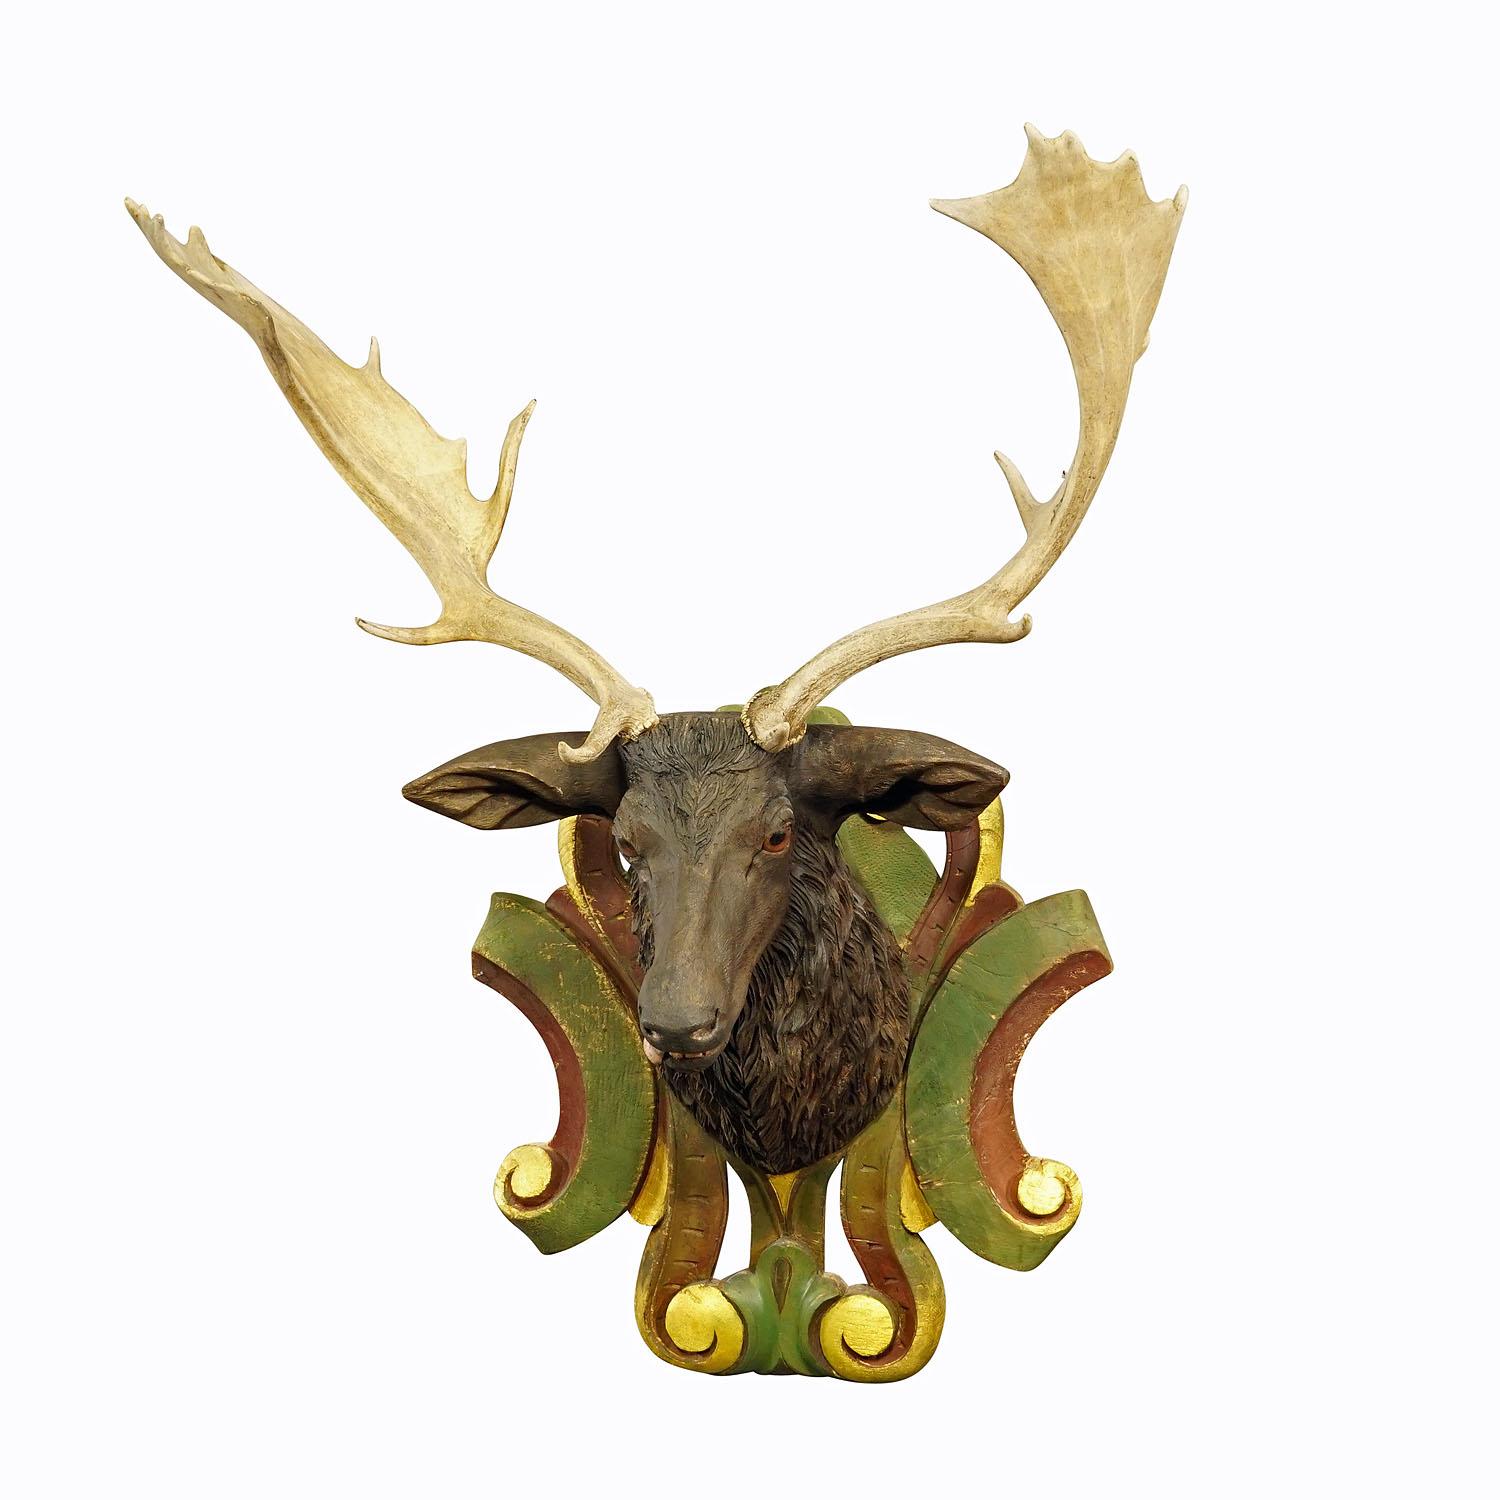 Huge black forest carved fallow deer head with large antlers circa. 1890

A monumental wooden carved Black Forest fallow deer head. Carved with realistic details in South Germany ca. 1890. It comes with a pair massive fallow deer antler trophys.